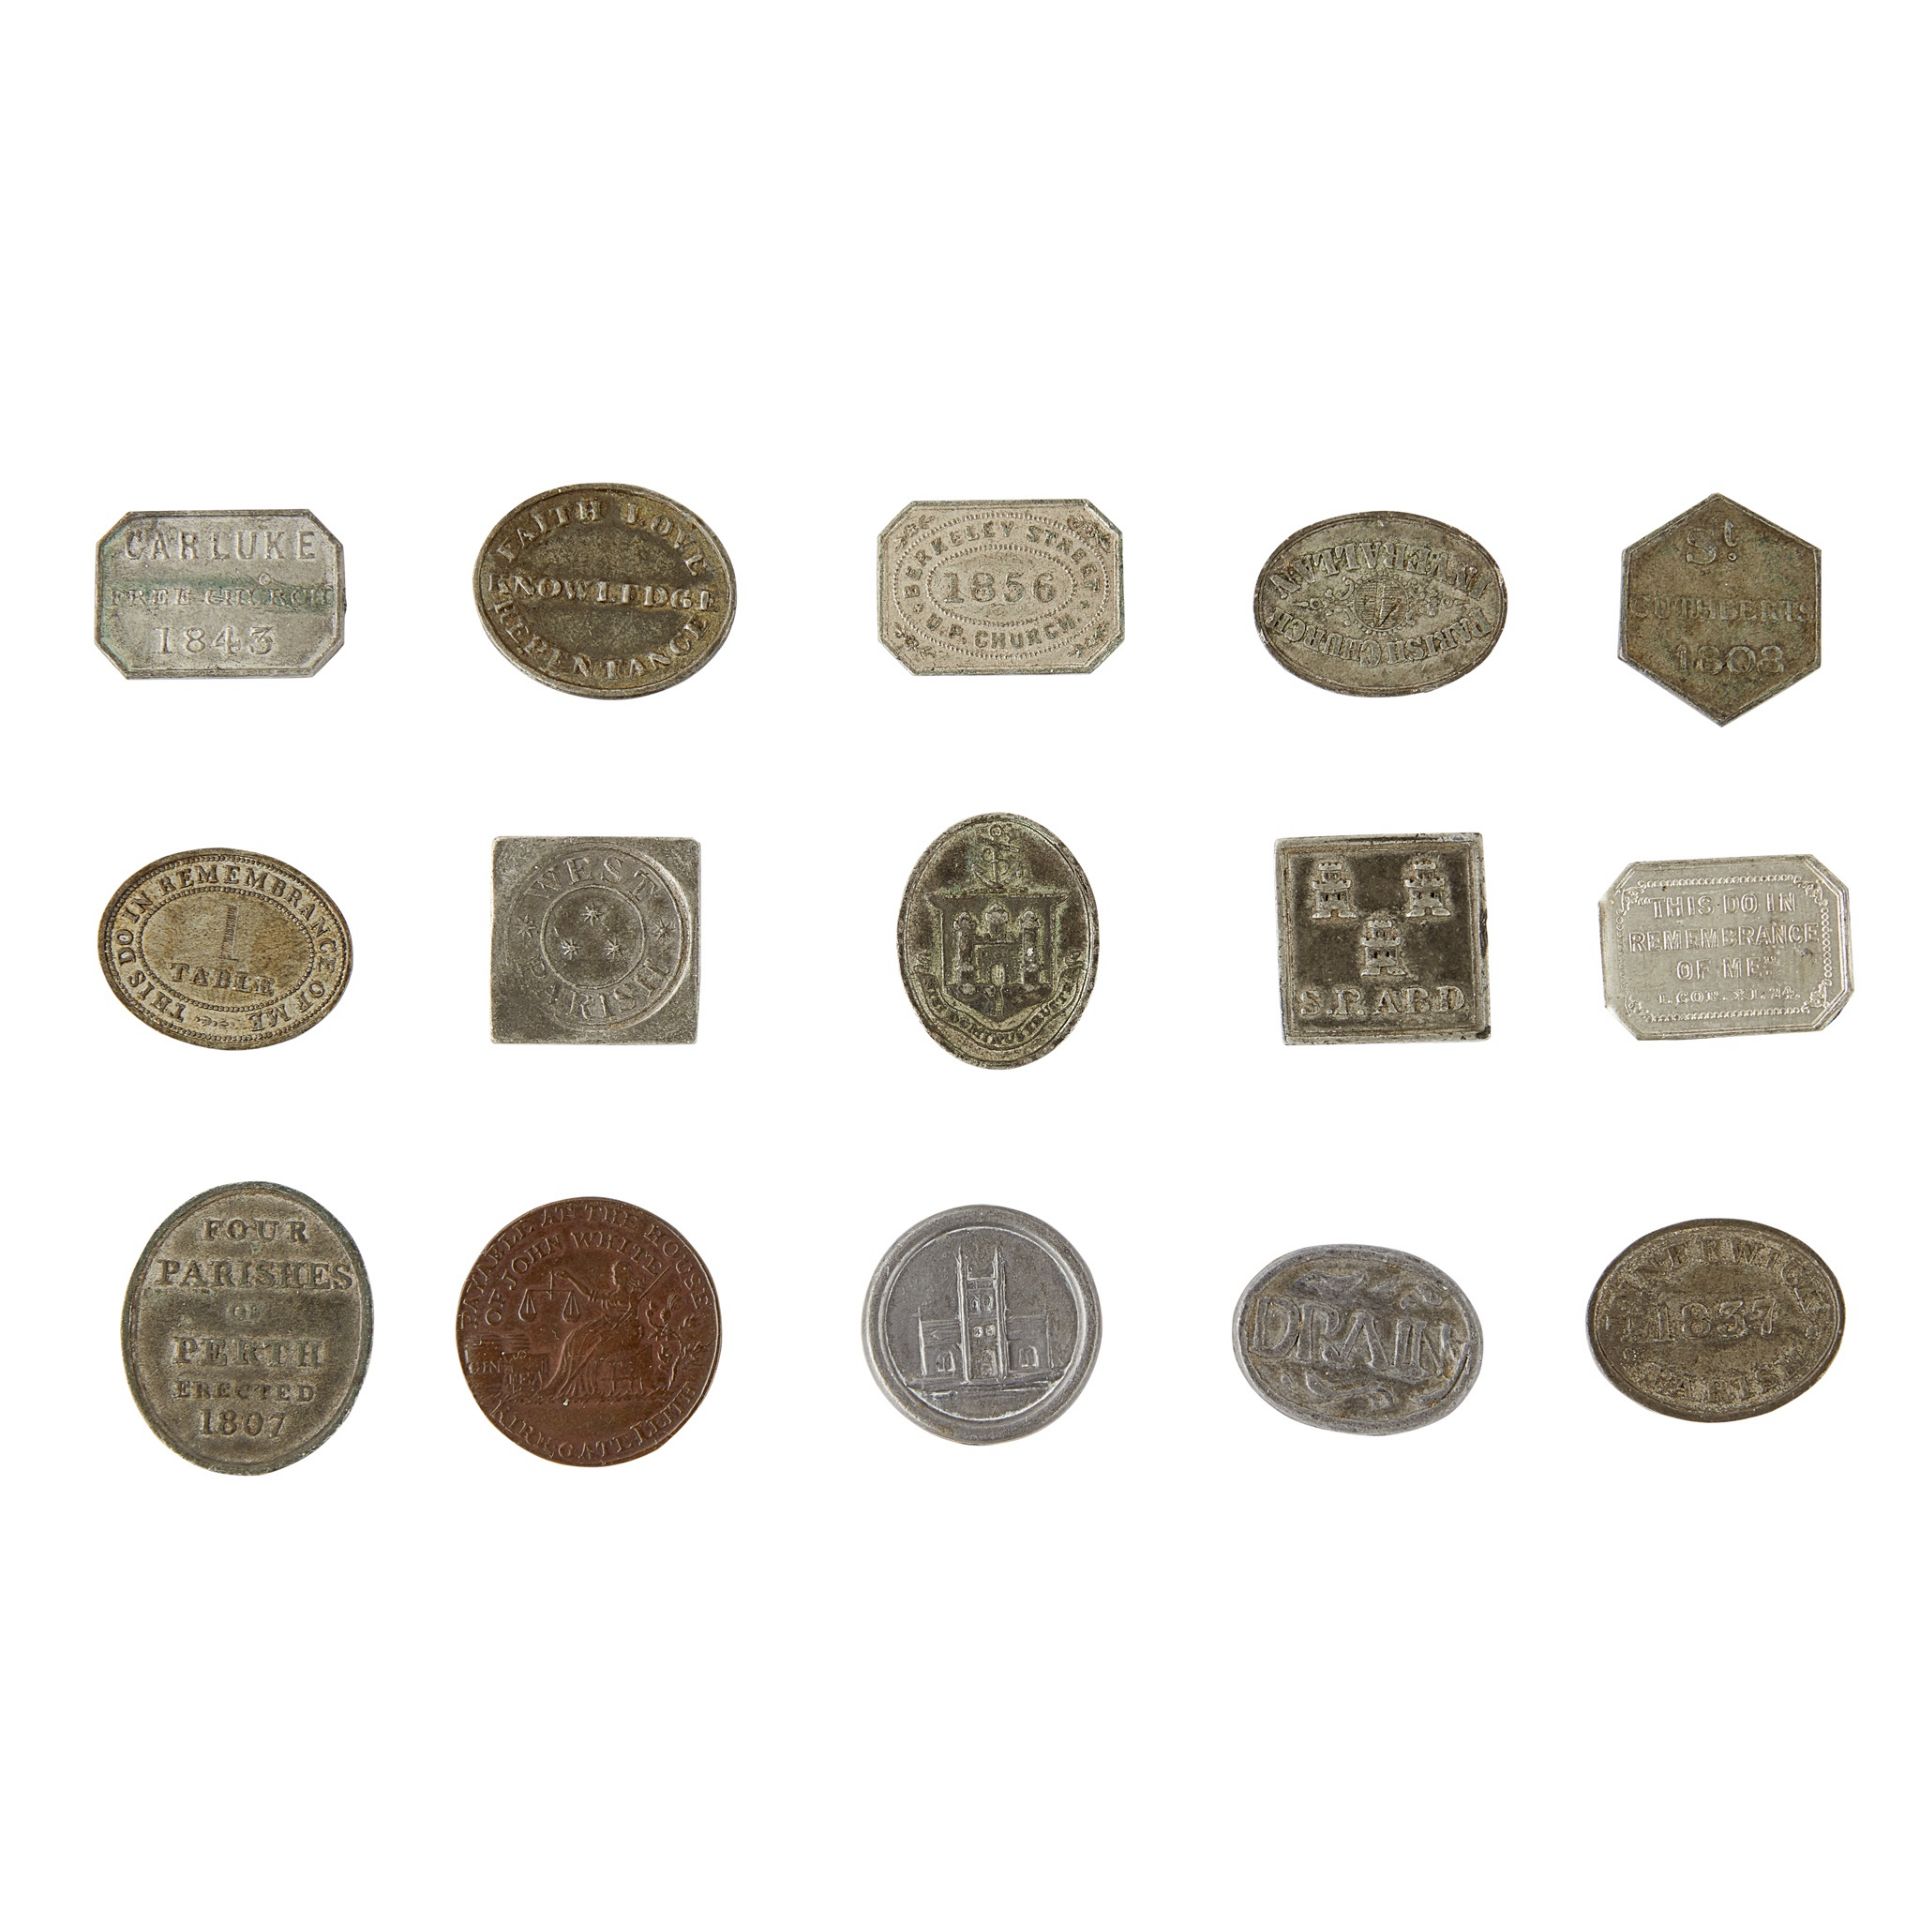 A collection of 18th and 19th century communion and other tokens